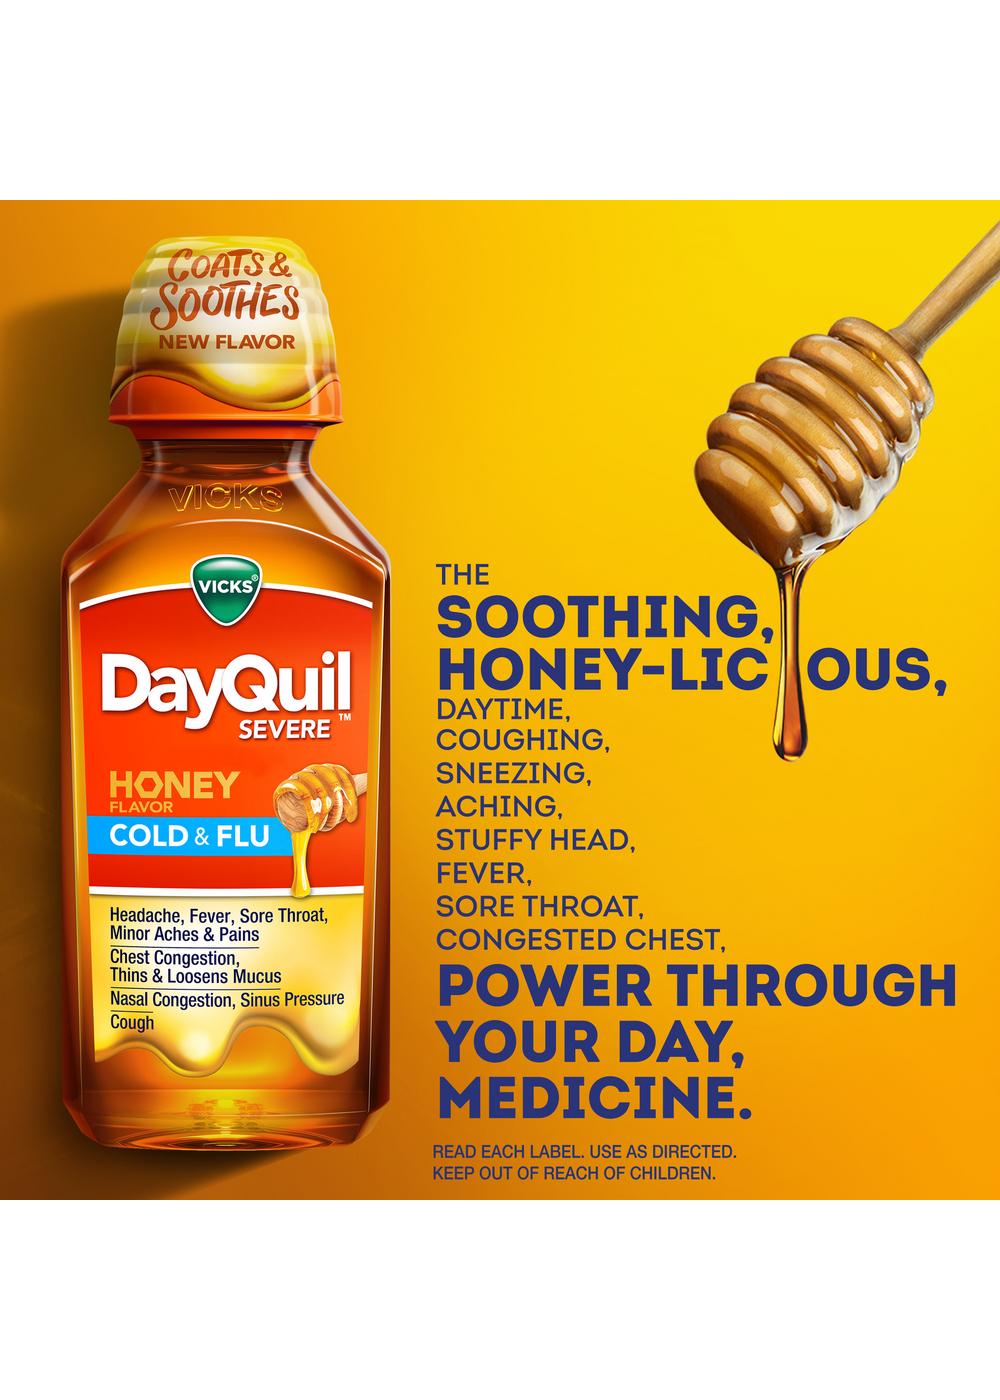 Vicks DayQuil SEVERE Cold & Flu Liquid - Honey; image 5 of 11